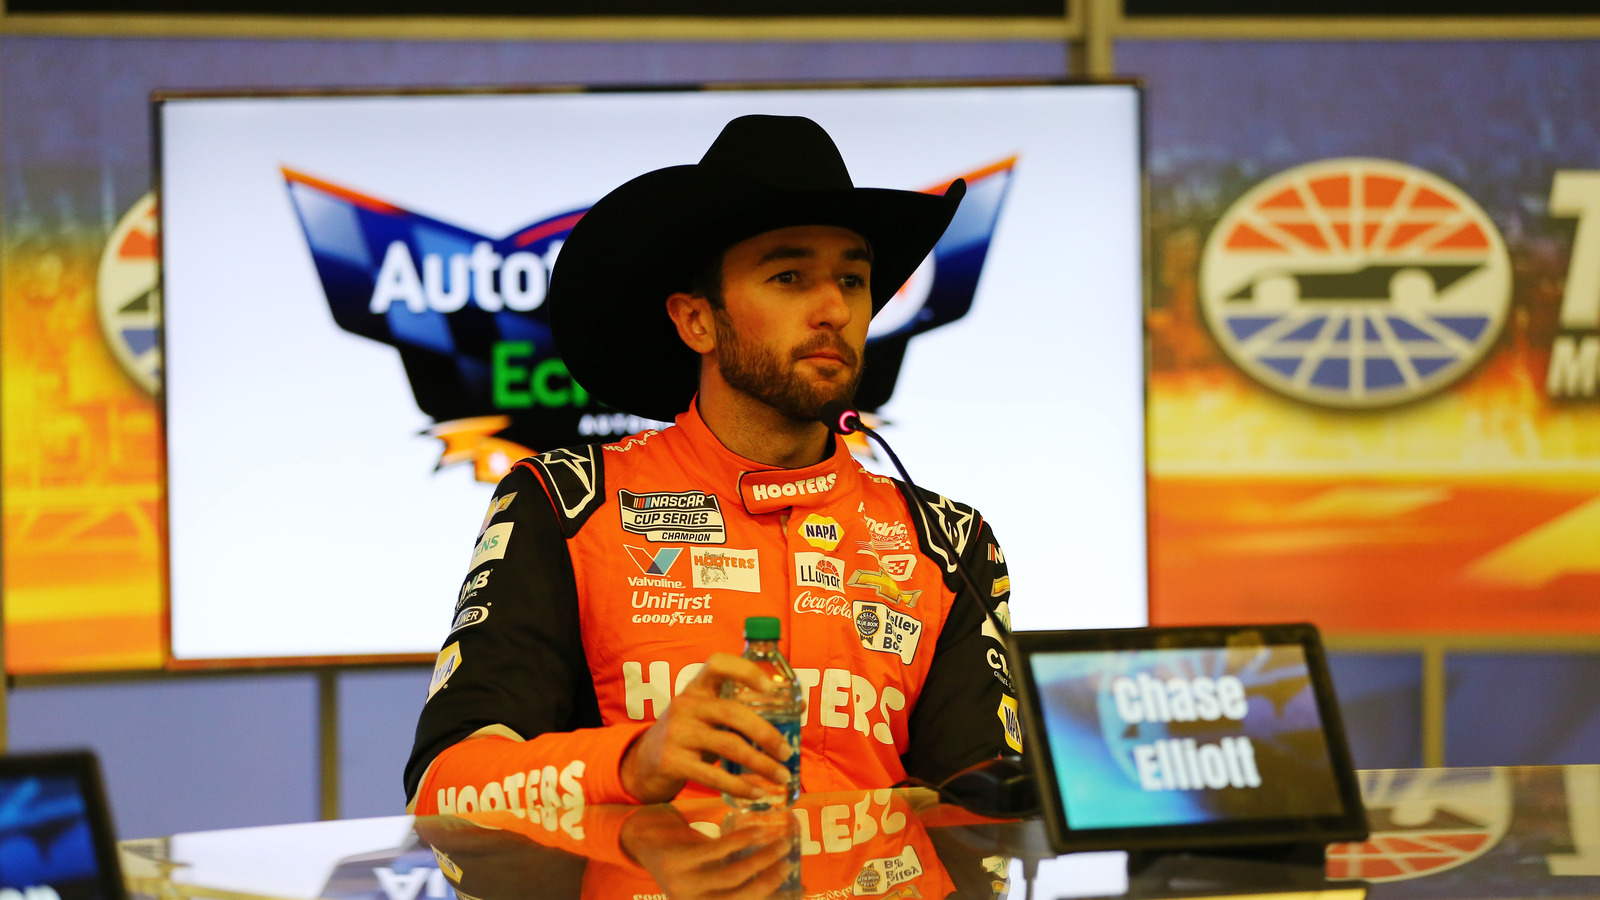 Watch: Chase Elliott reviews his harsh criticism of Texas Motor Speedway after recent triumph